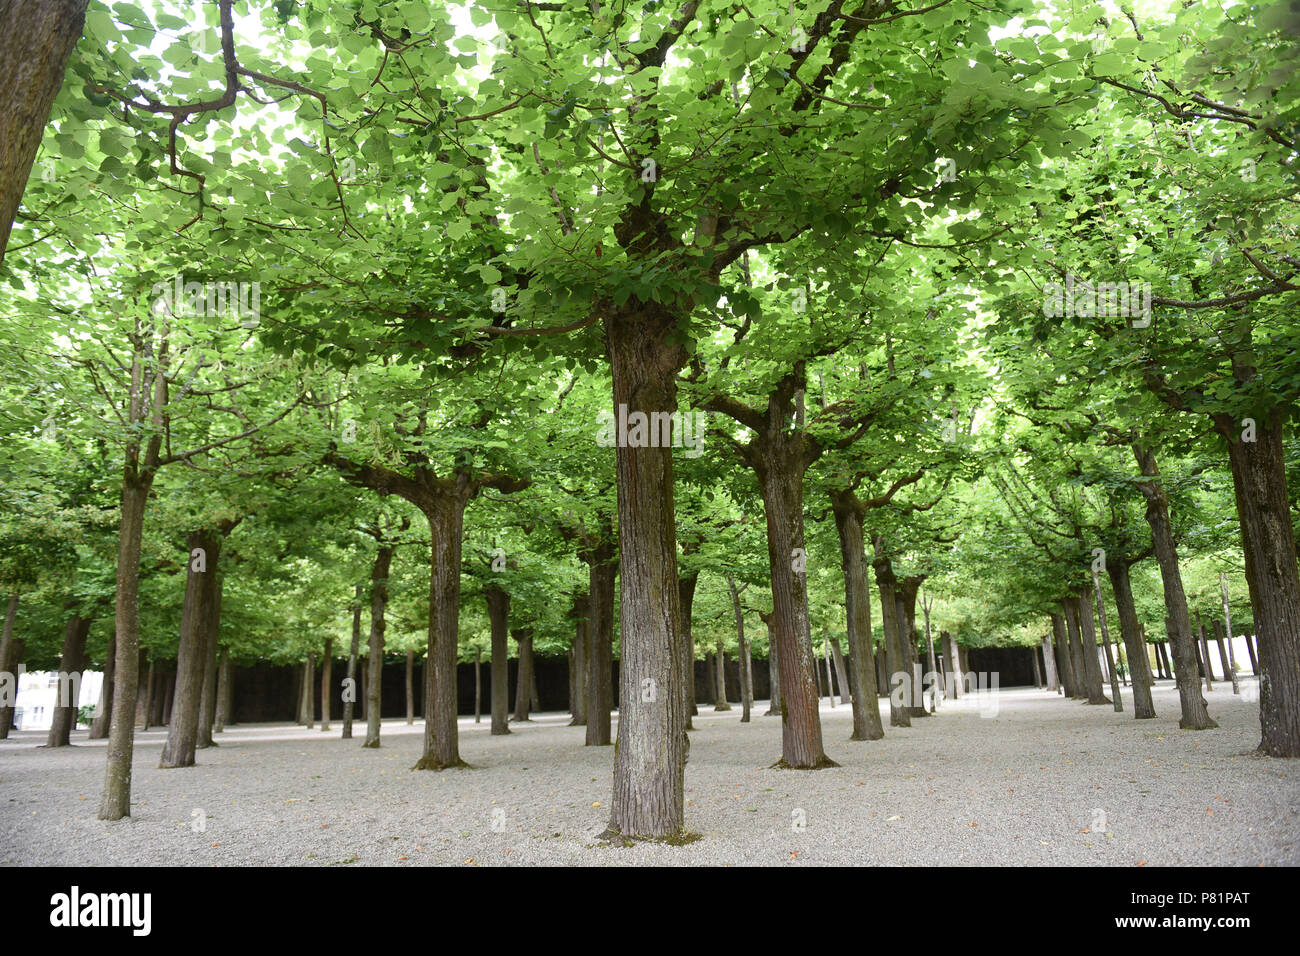 Lime trees in the gardens of the Schloss castle in Weilburg an der Lahn In Germany Europe Stock Photo